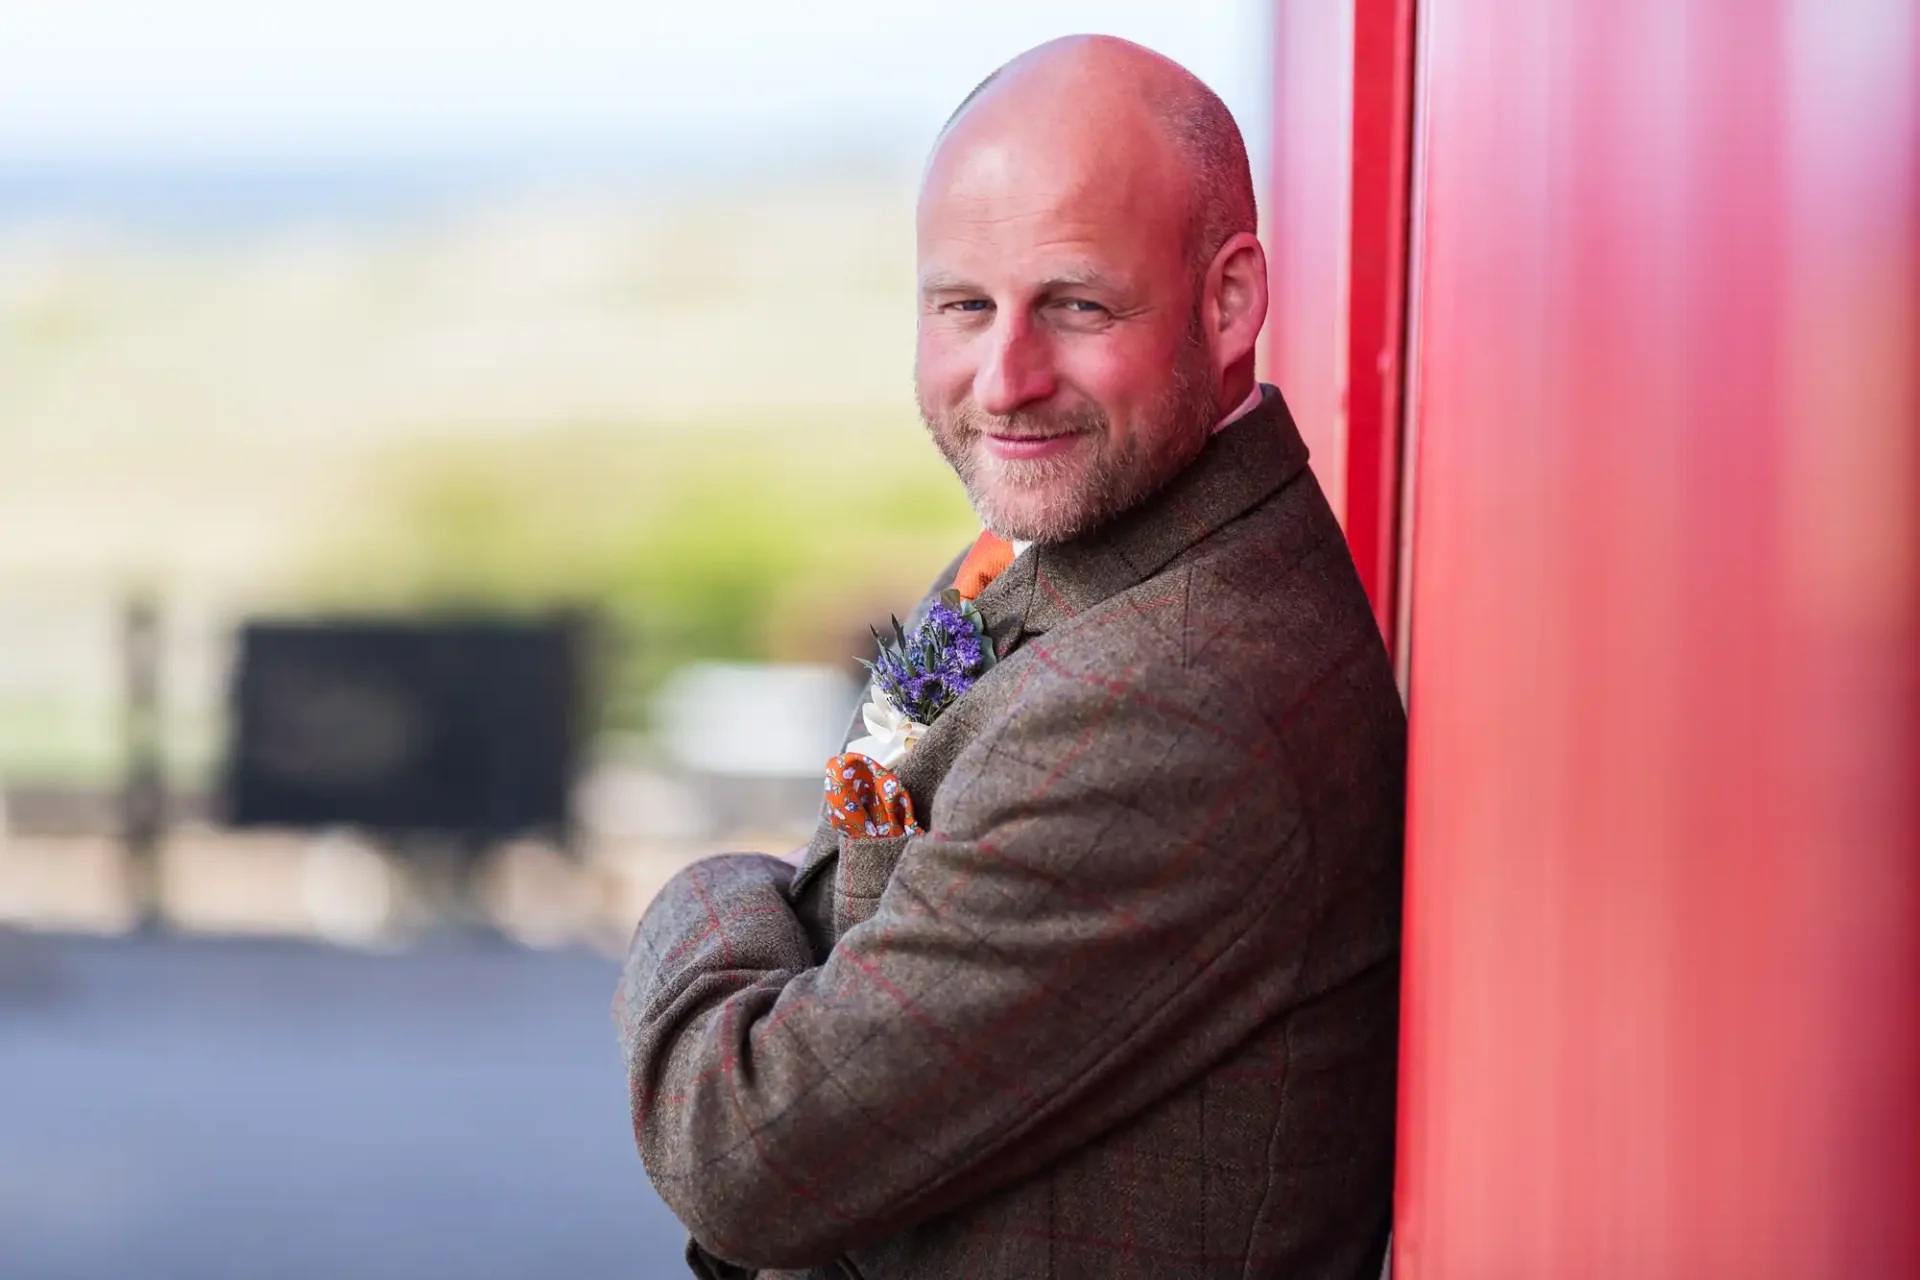 A bald man in a tweed jacket smiling and leaning against a bright red wall, holding flowers.